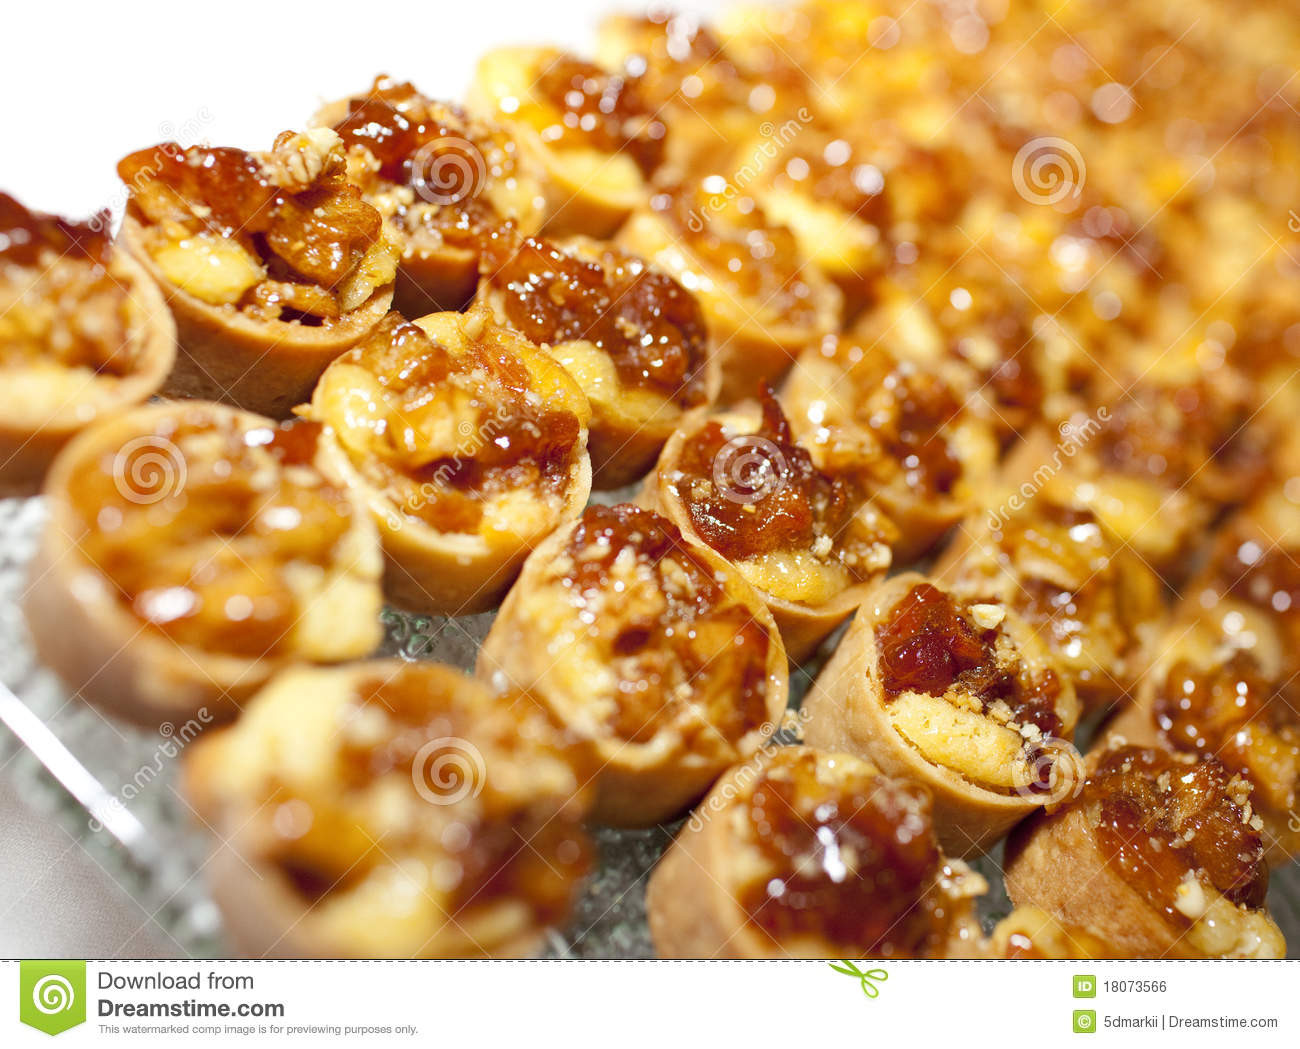 Snacks For Dinner
 Snack Food A Dinner Party Stock Image of party